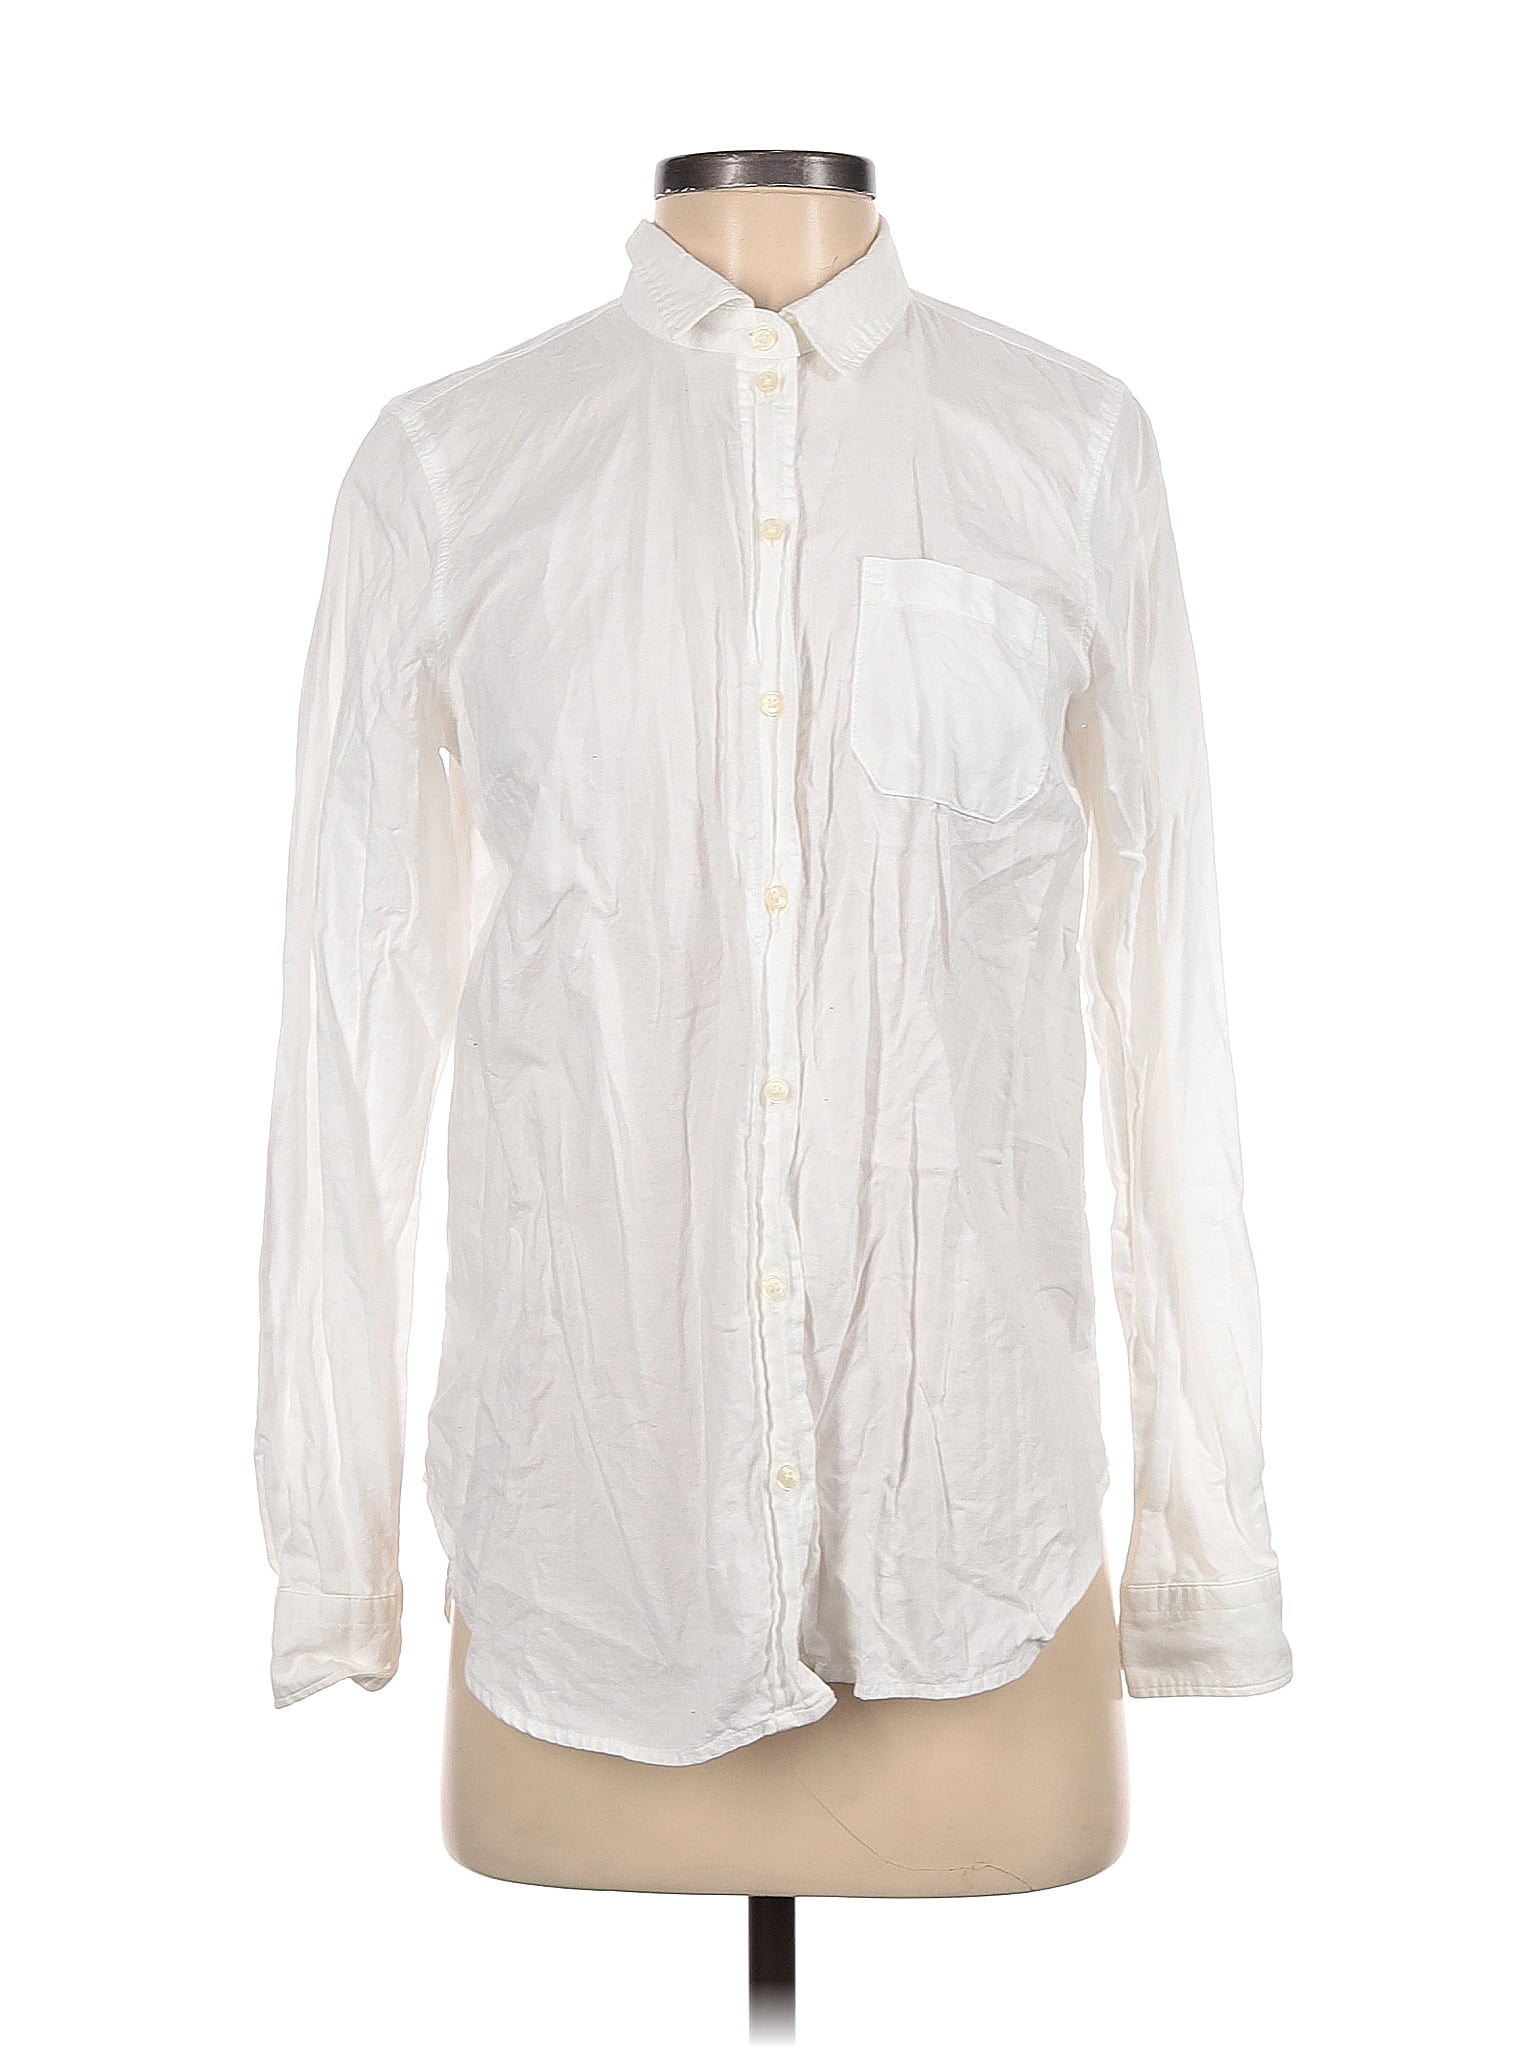 Old Navy 100% Cotton White Long Sleeve Button-Down Shirt Size S - 45% ...